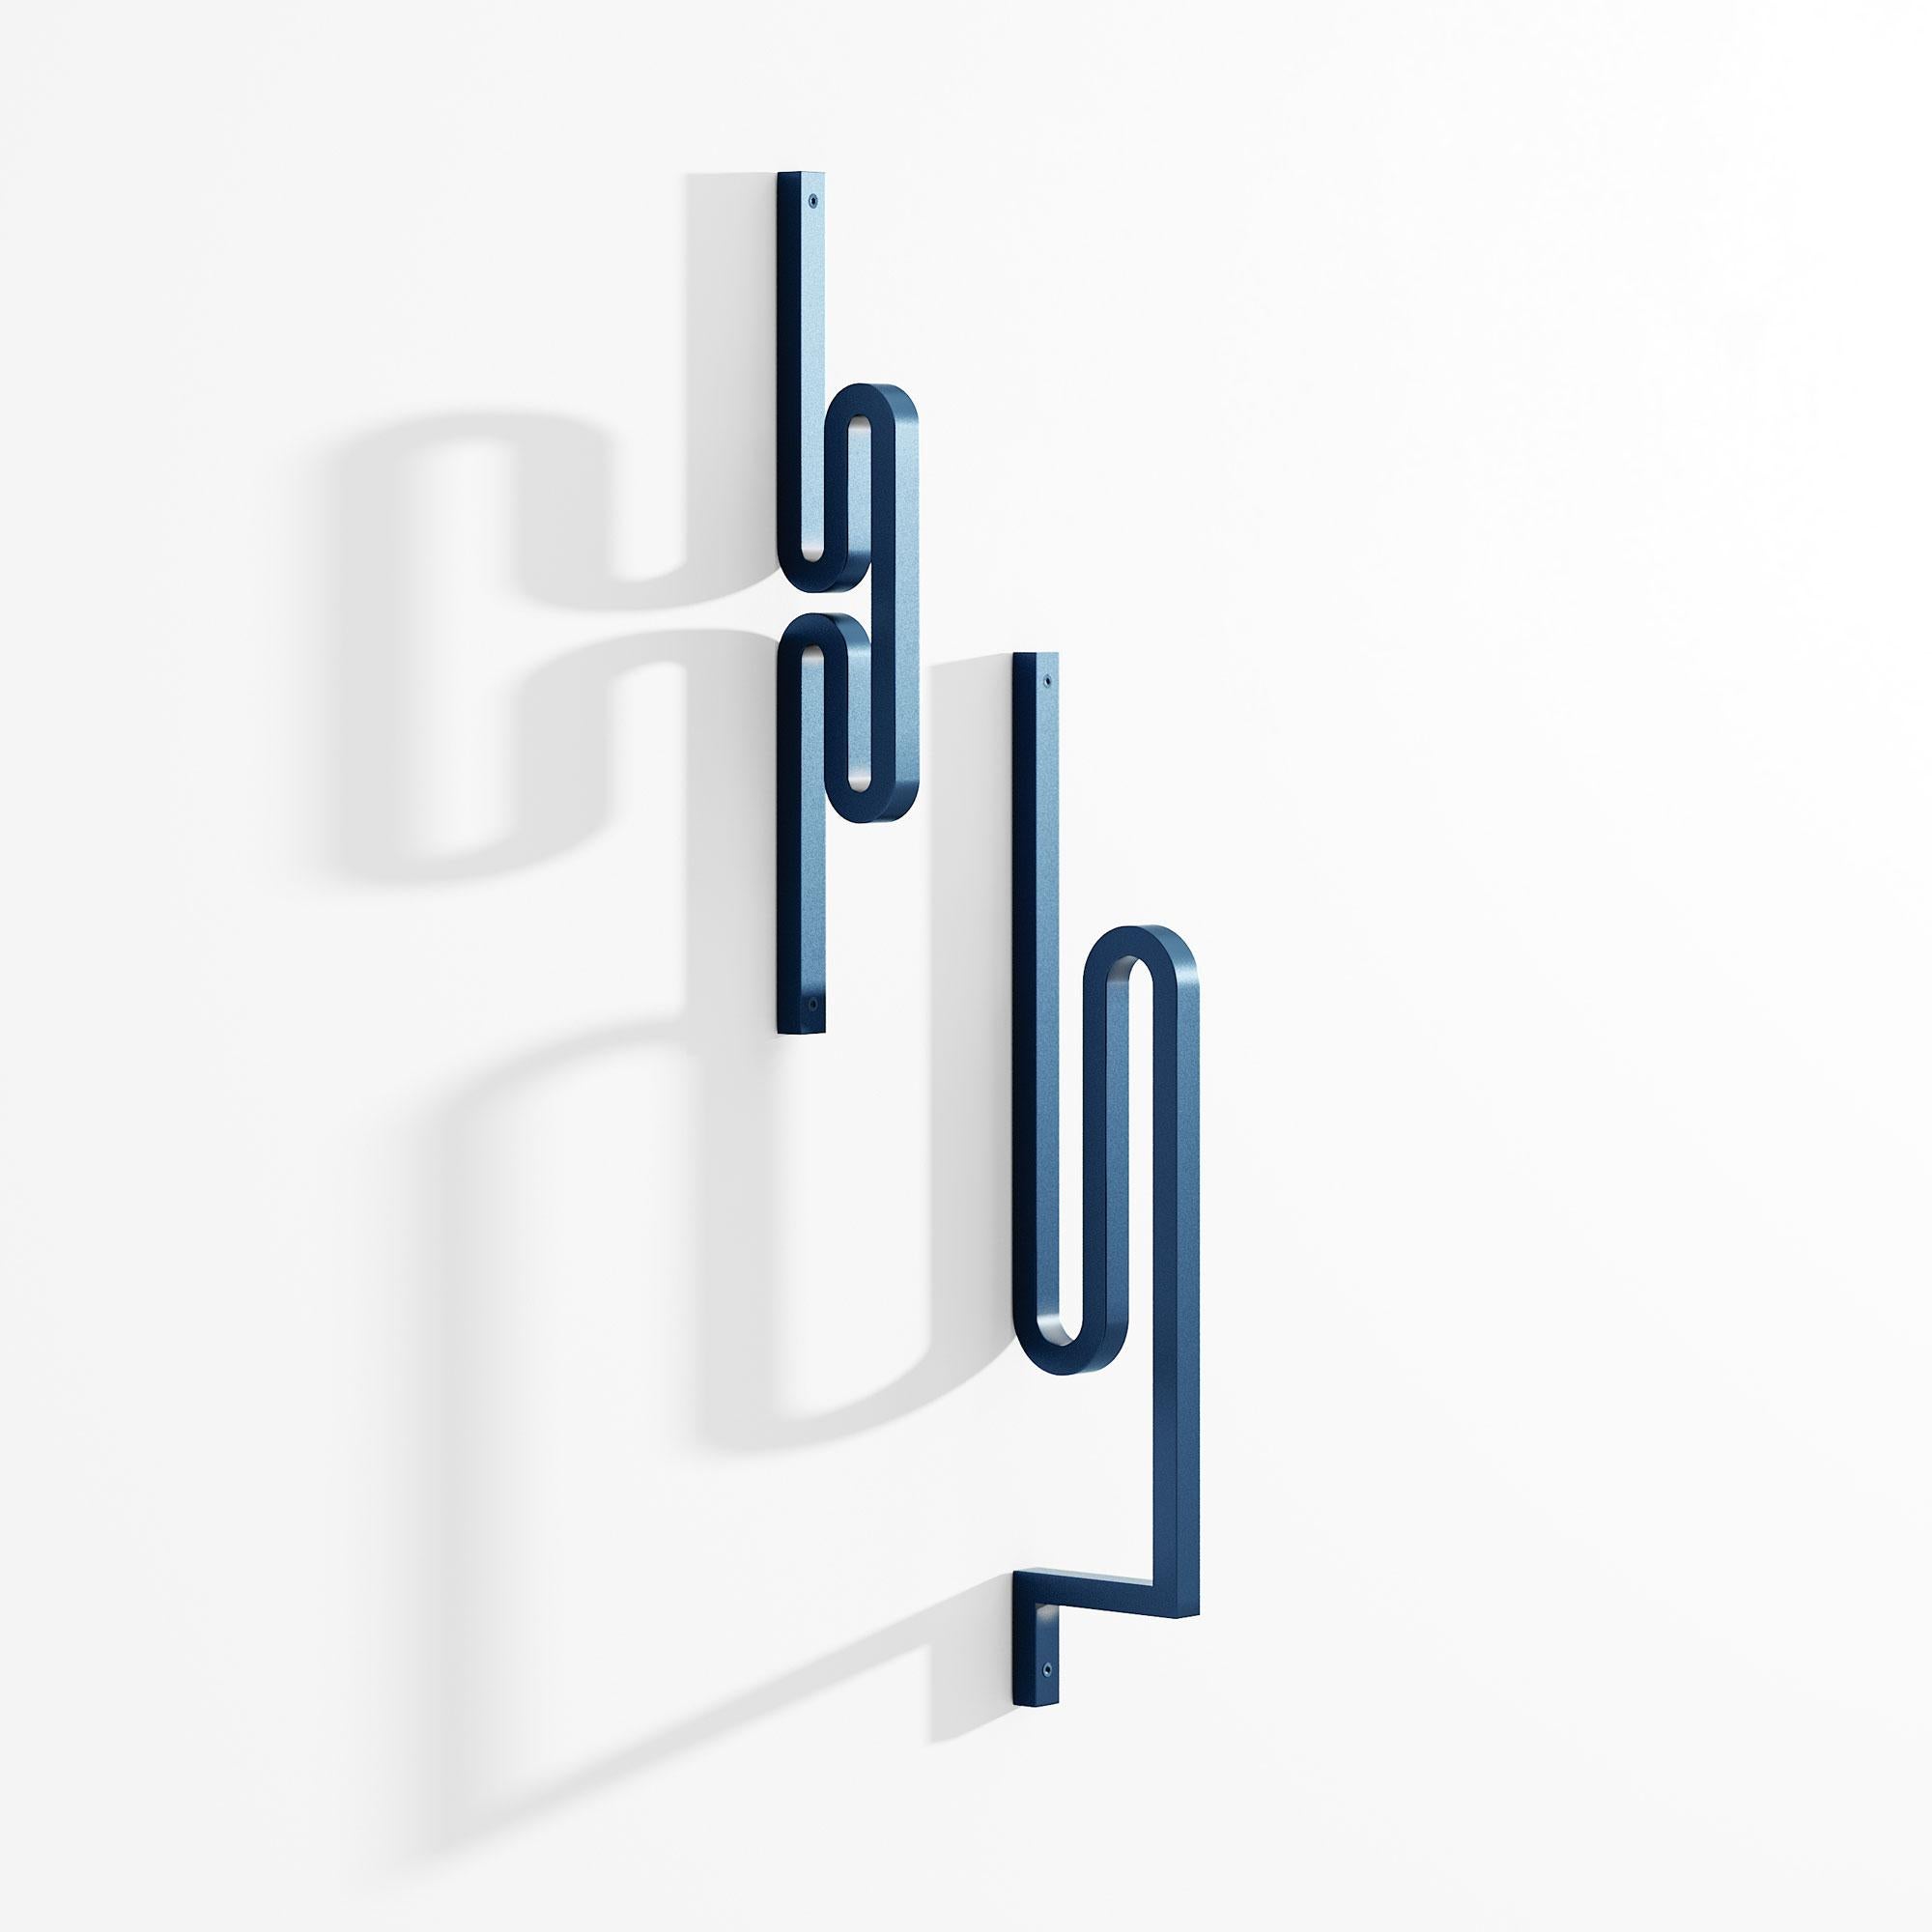 Set of 2 Zag coat hanger by Bling Desing Studio.
Dimensions: H26,5, x L5 - H38 x L8.
Materials: blue textured metal


Zag is a family of coat hooks whose shapes are inspired by barrettes and pins. Each Zag is like an imaginary letter that